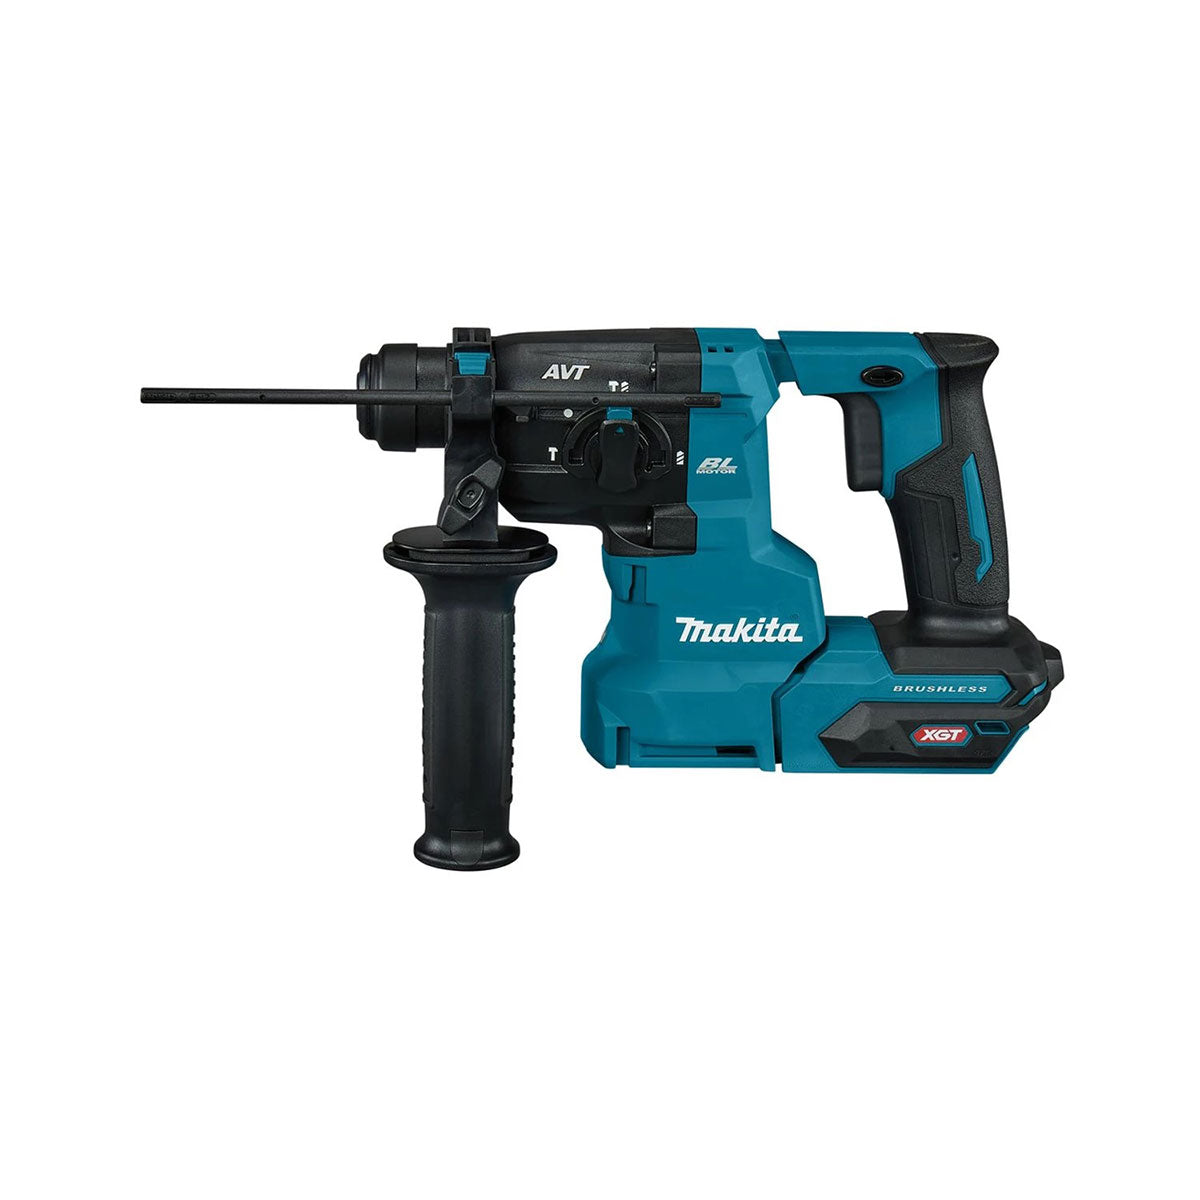 Makita HR010GZ01 40V XGT Brushless SDS Plus Rotary Hammer Drill With Type 4 Case